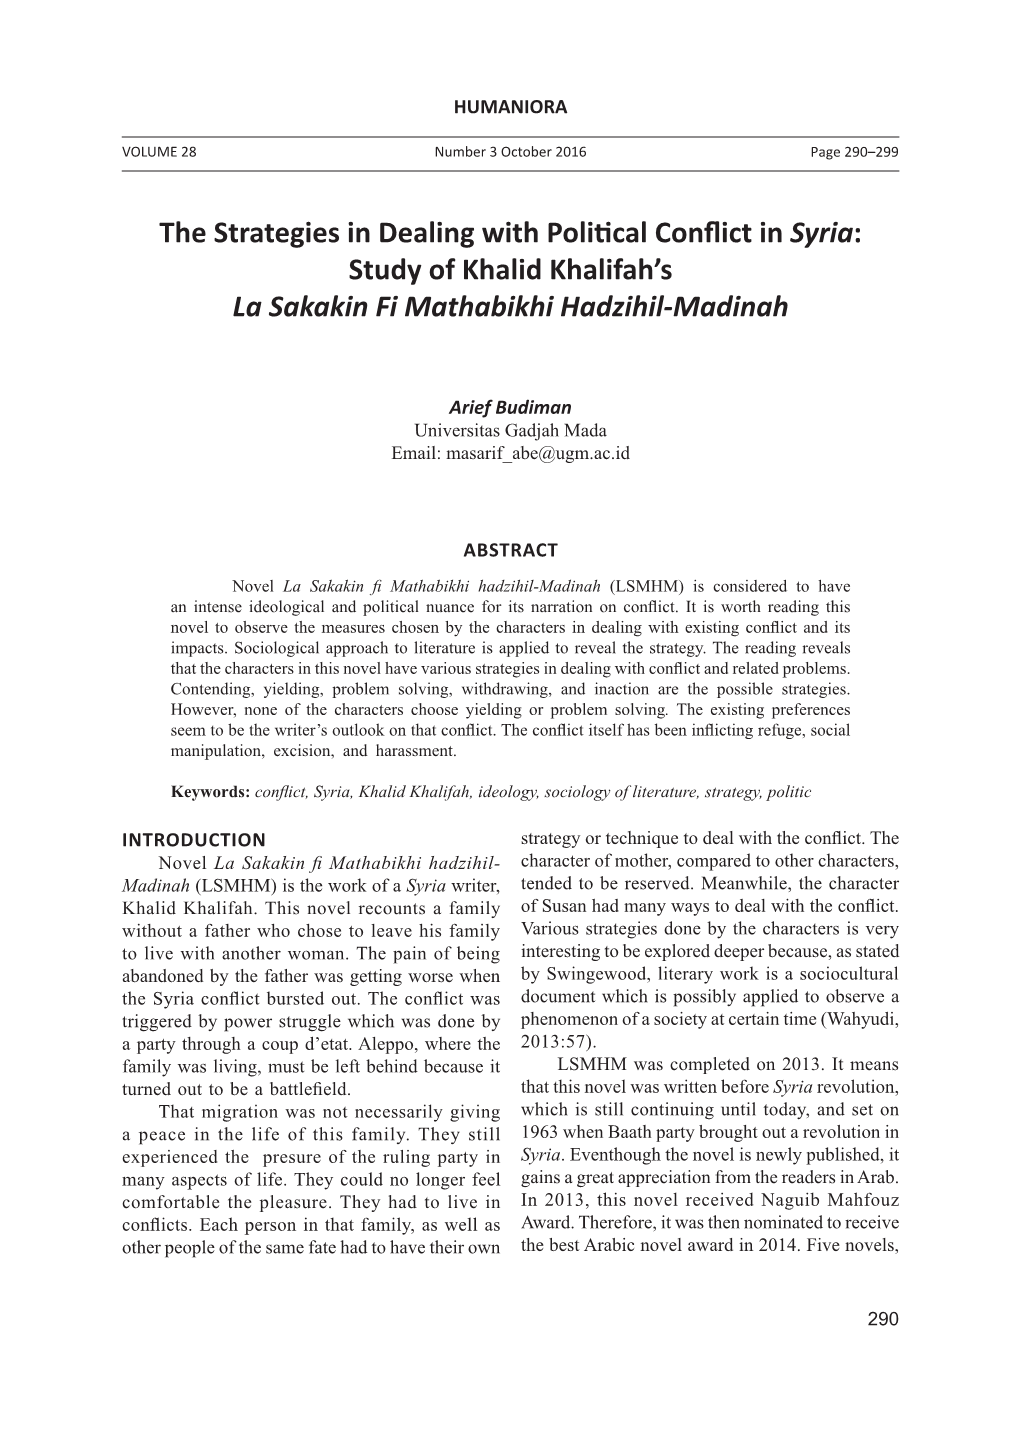 The Strategies in Dealing with Political Conflict in Syria